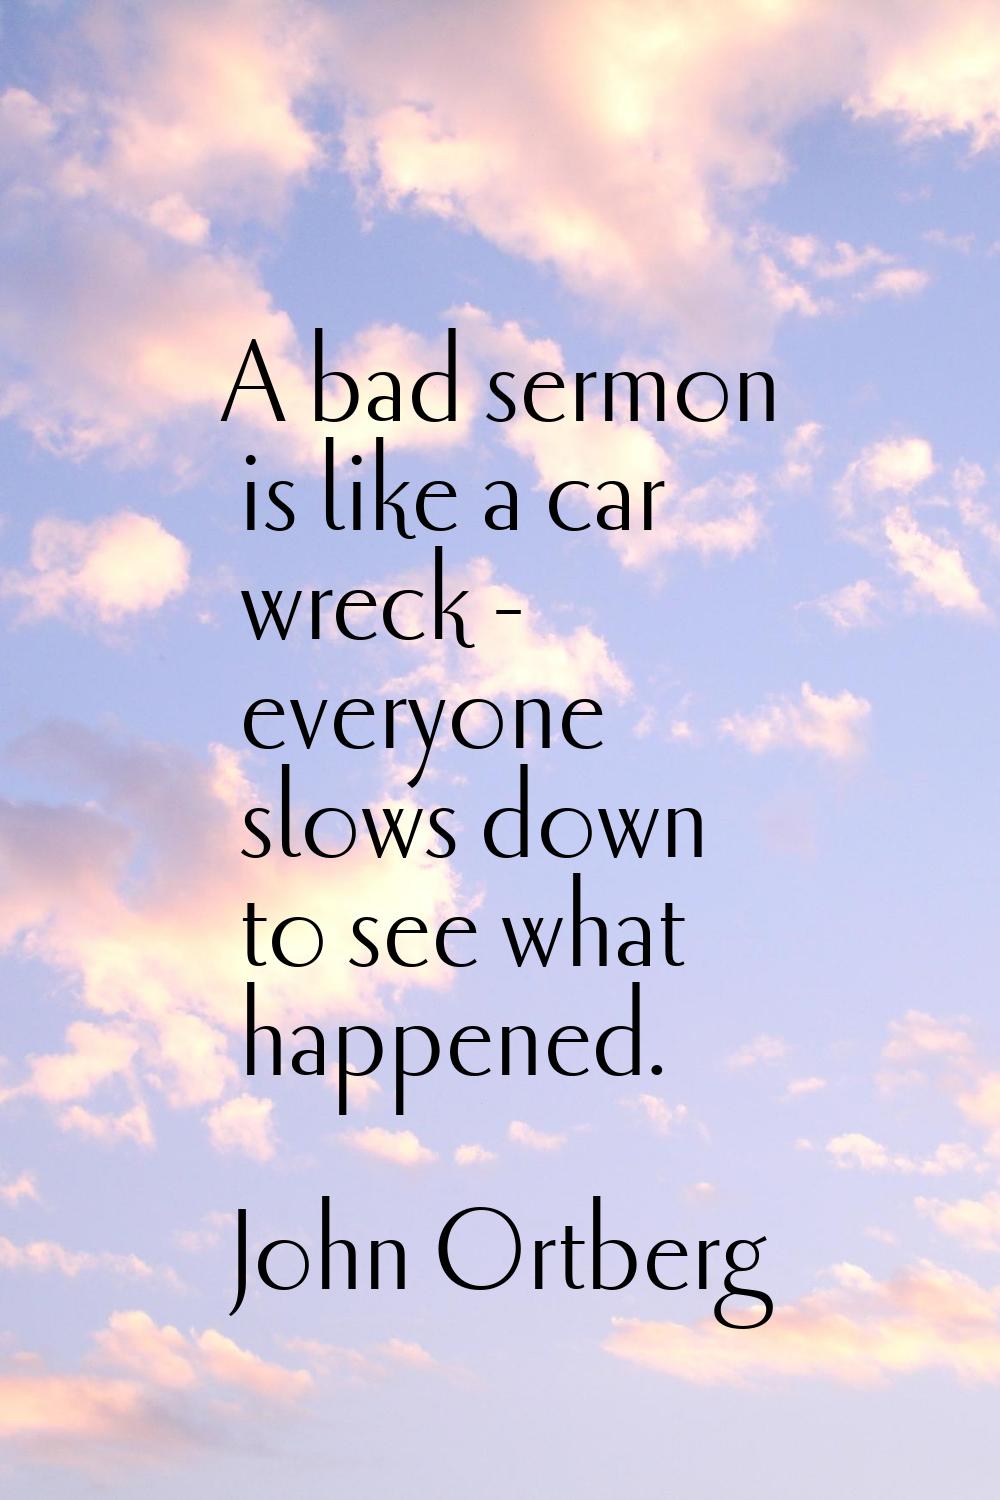 A bad sermon is like a car wreck - everyone slows down to see what happened.